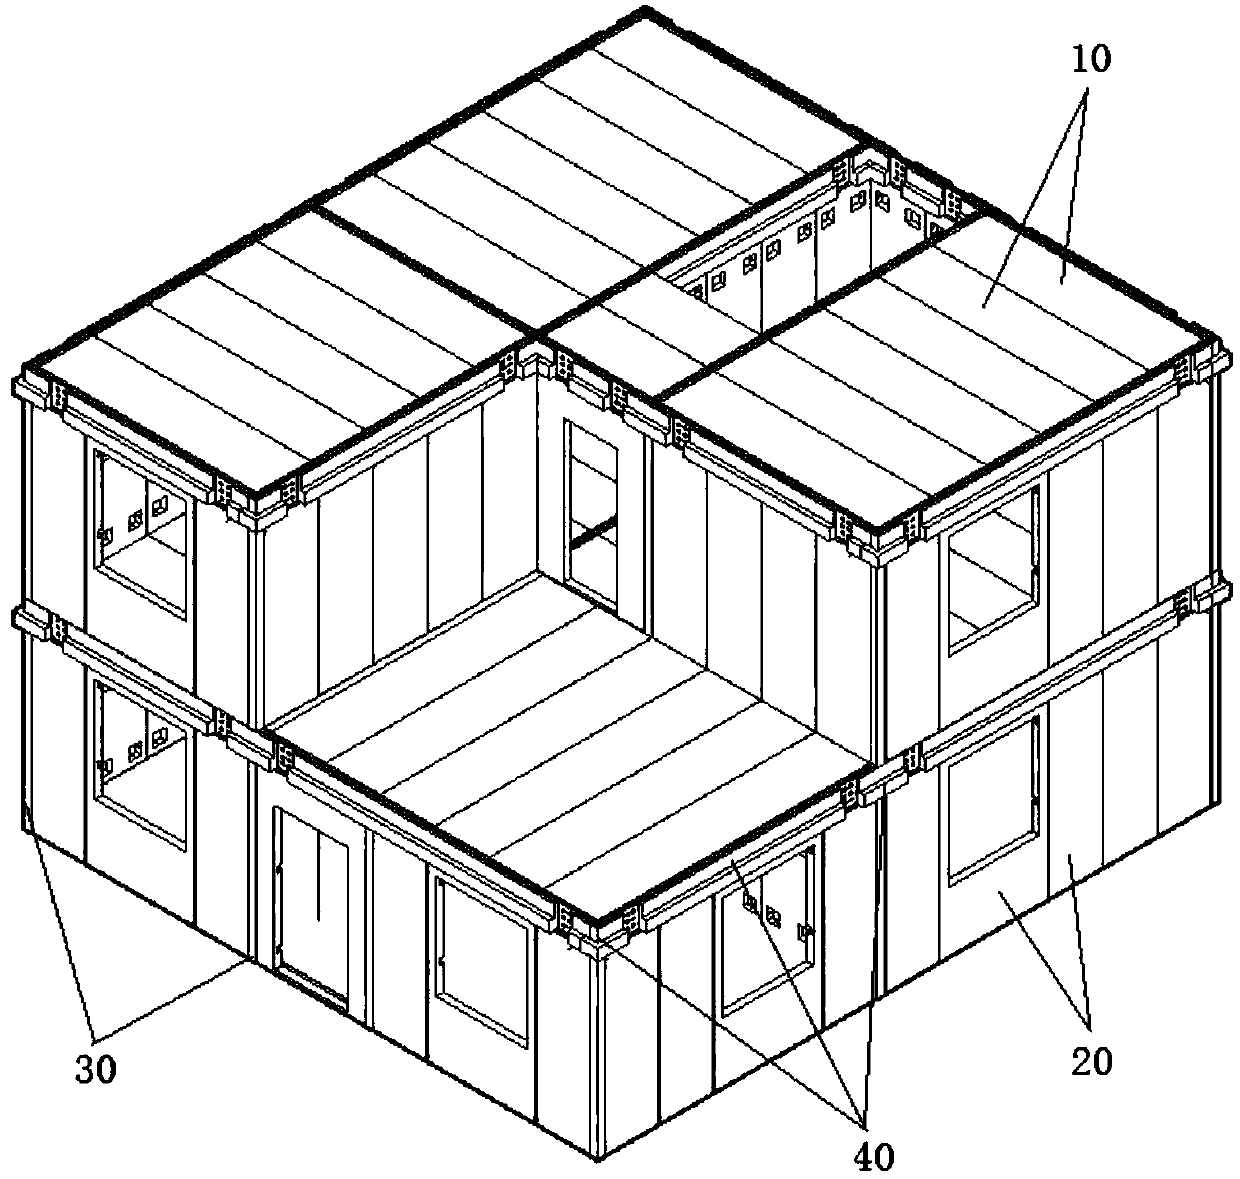 Building method of full-fabricated-type house